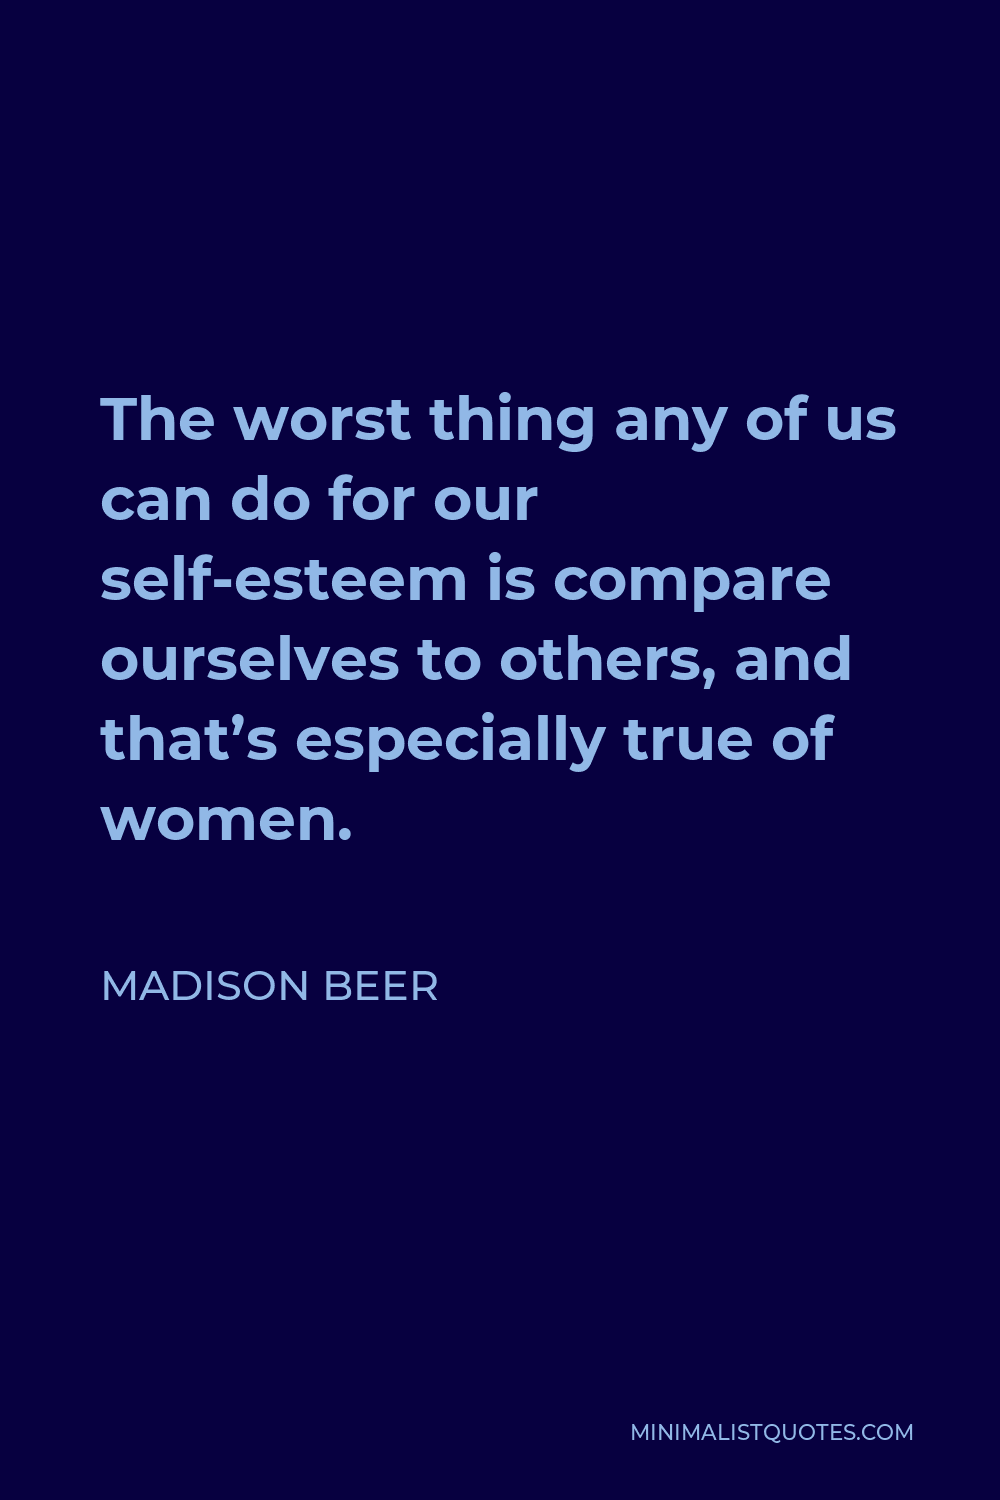 Madison Beer Quote - The worst thing any of us can do for our self-esteem is compare ourselves to others, and that’s especially true of women.